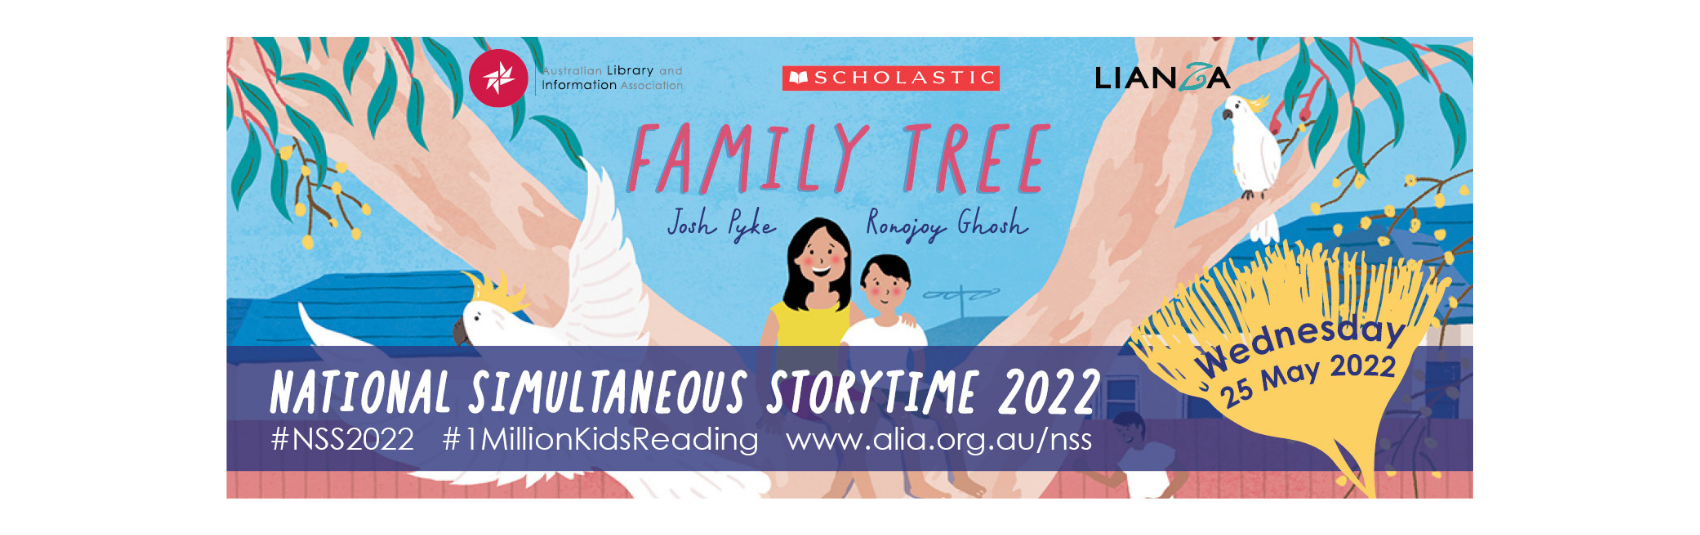 National Simultaneous Storytime 2022 banner